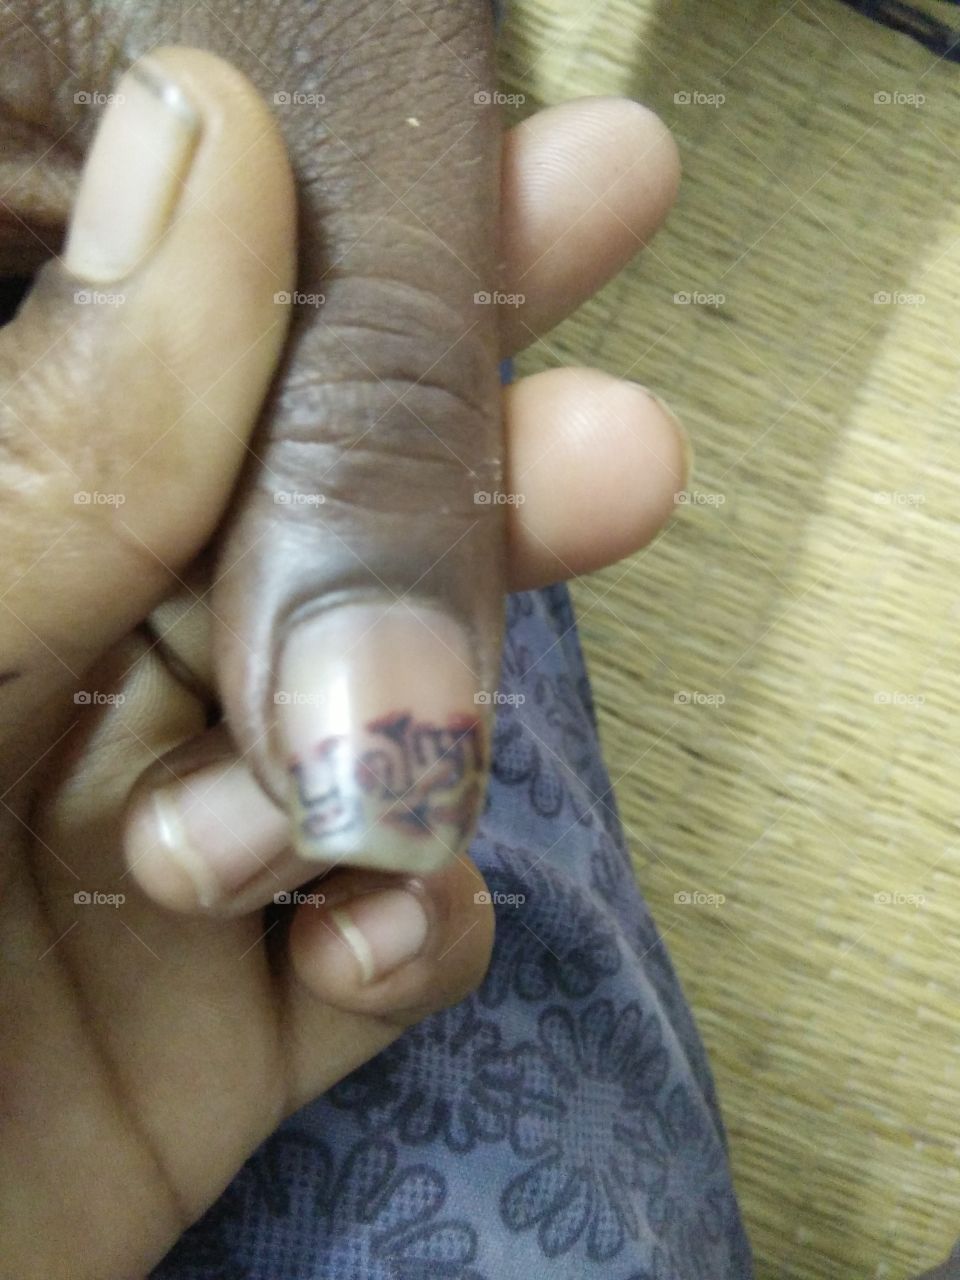 nail writing in pen with name